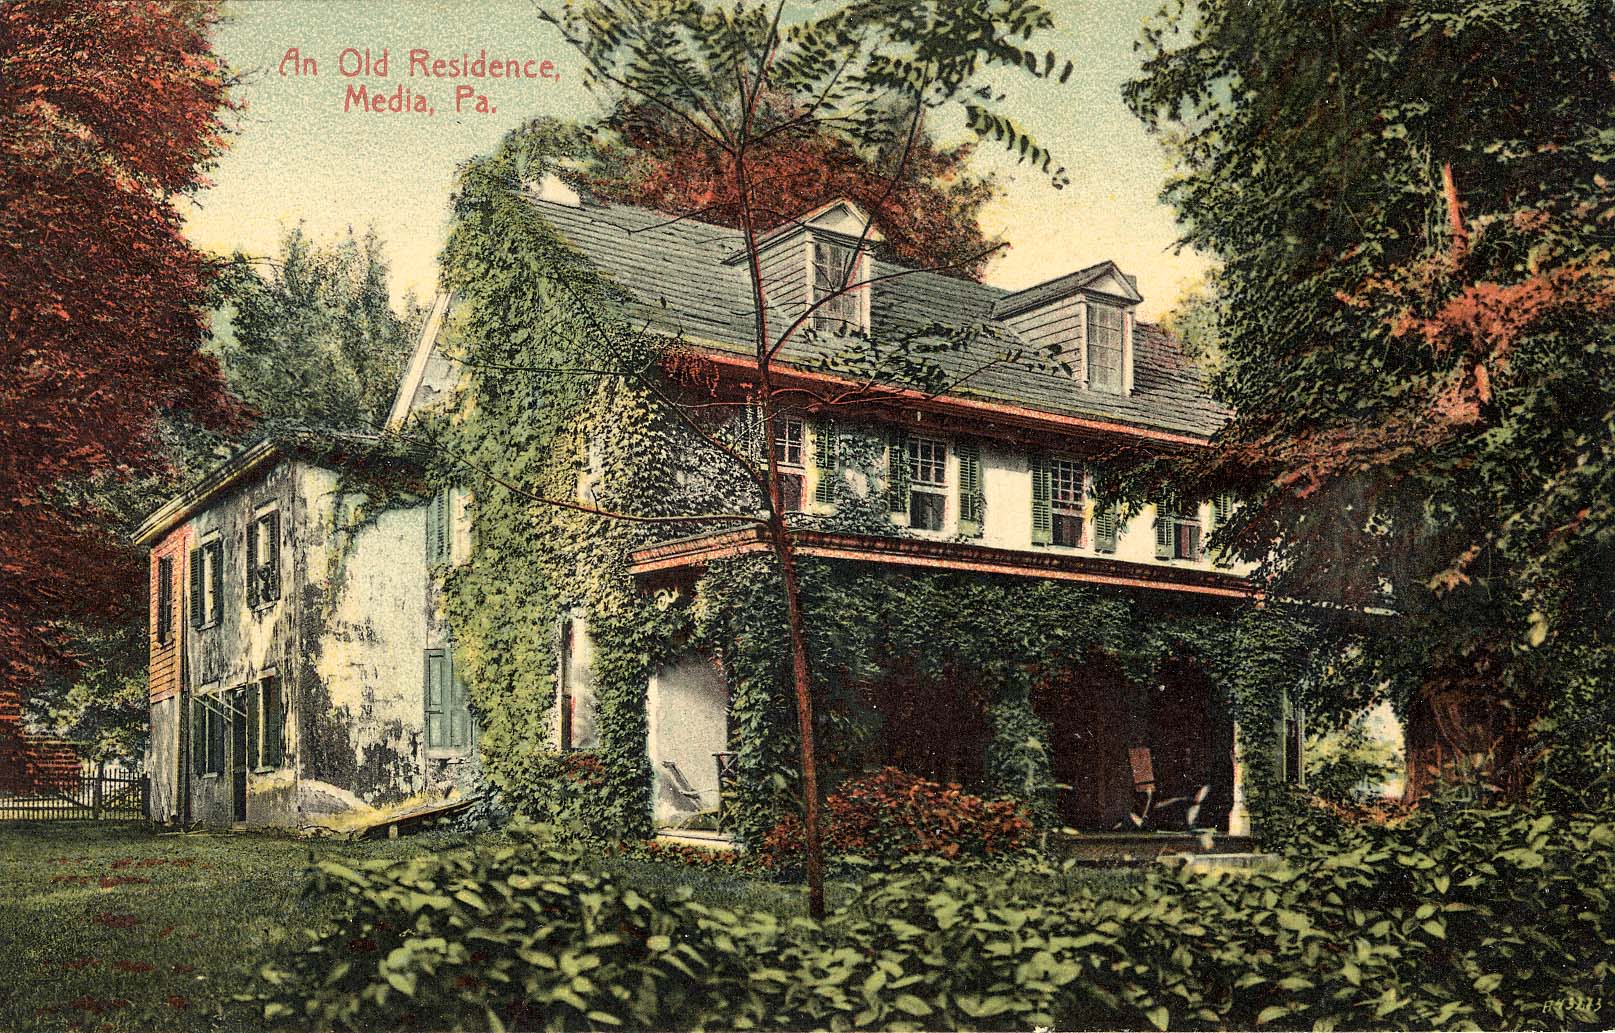 Media Pa. An Old Residence c.1907 pc